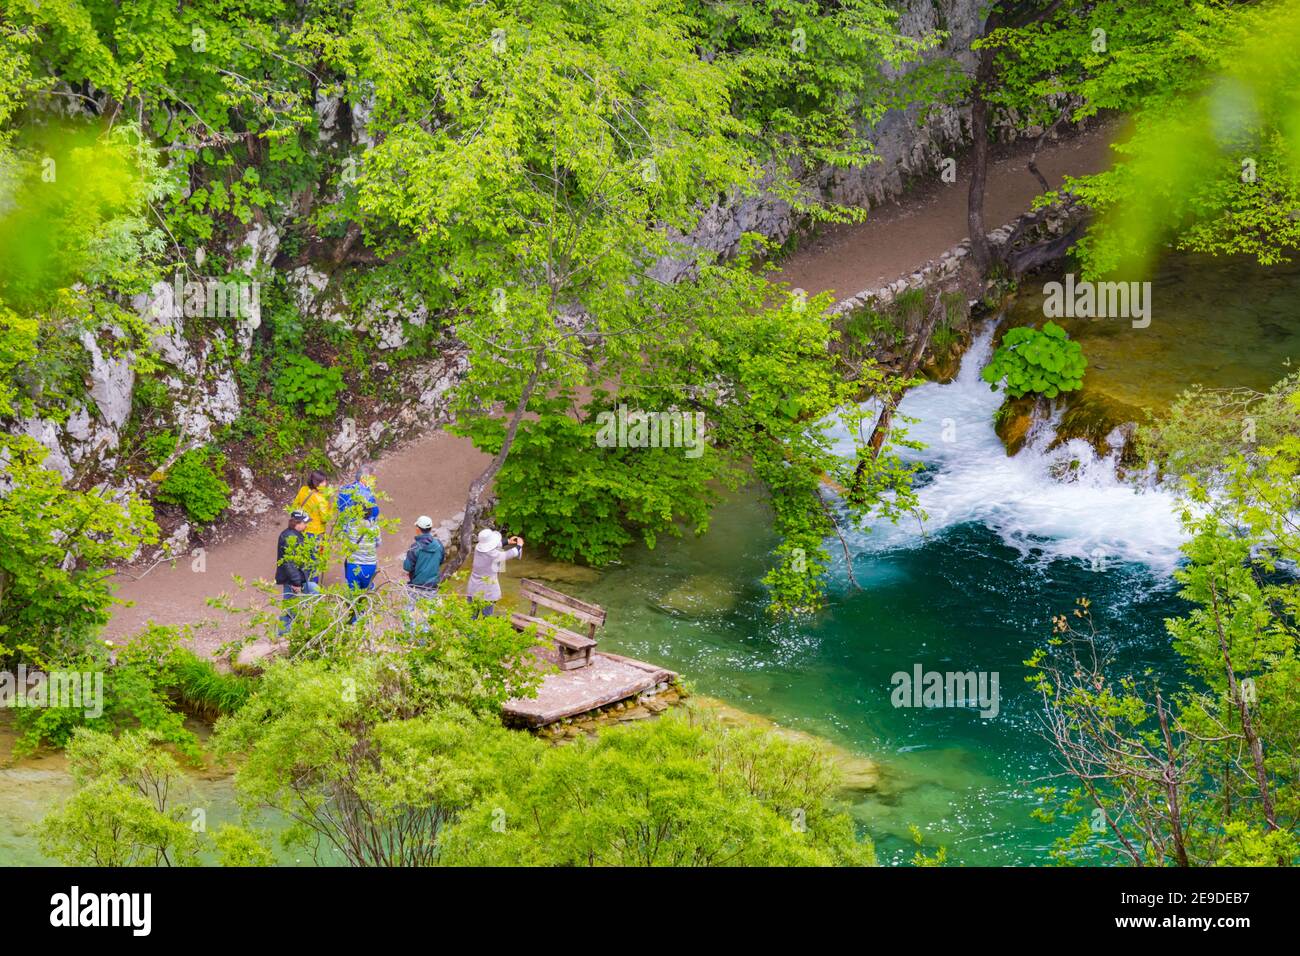 People photographing small waterfall in national park Plitvice lakes Croatia Europe view from above Stock Photo